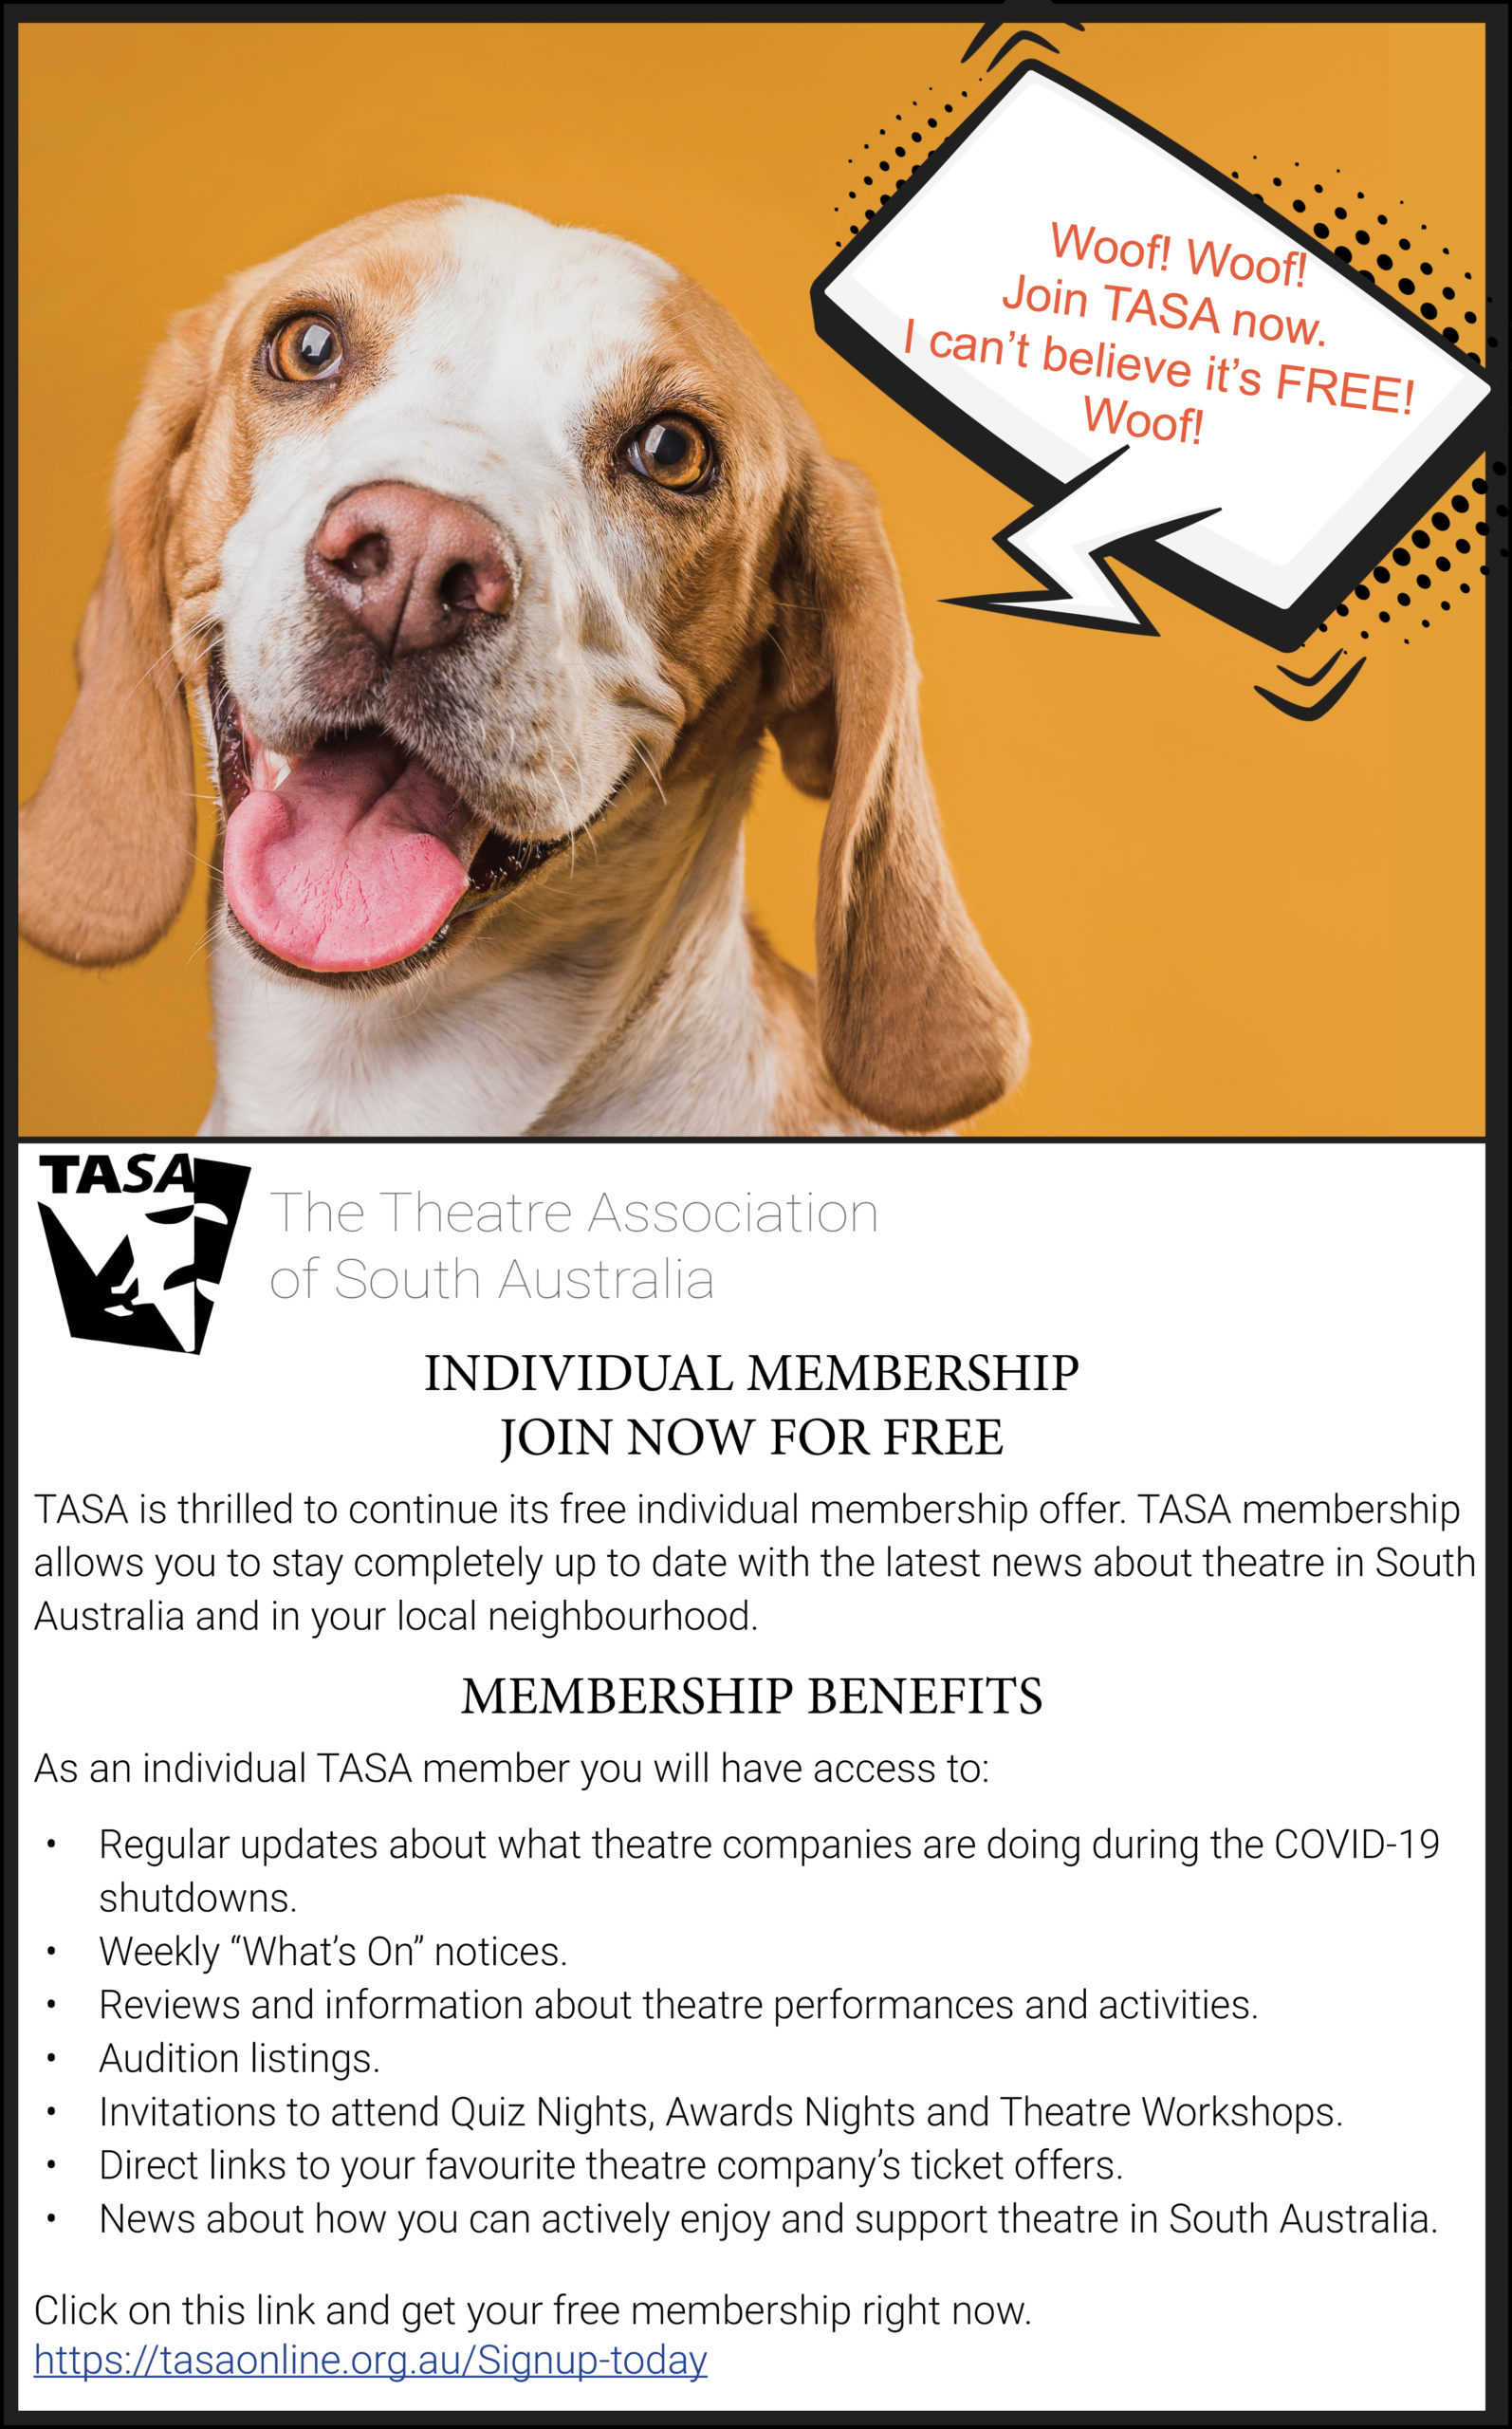 Dog barking/ announcing that TASA membership is now free for individuals